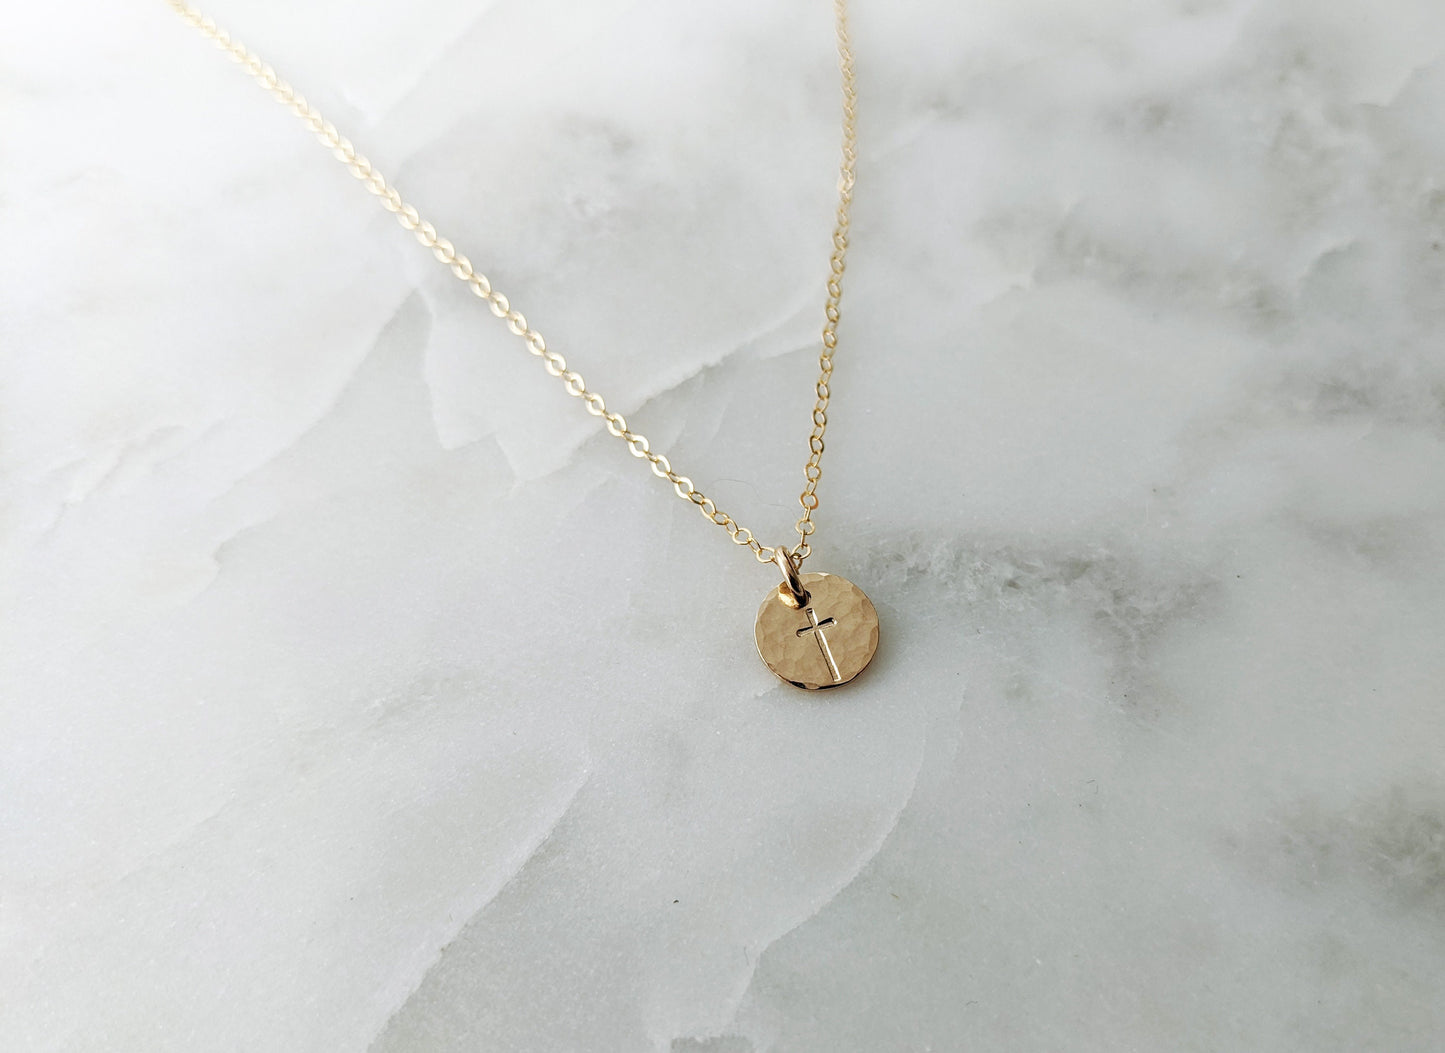 Gold Cross Necklace | Dainty Cross | Tiny Gold Disc | Minimal Jewelry | The Stamped Life